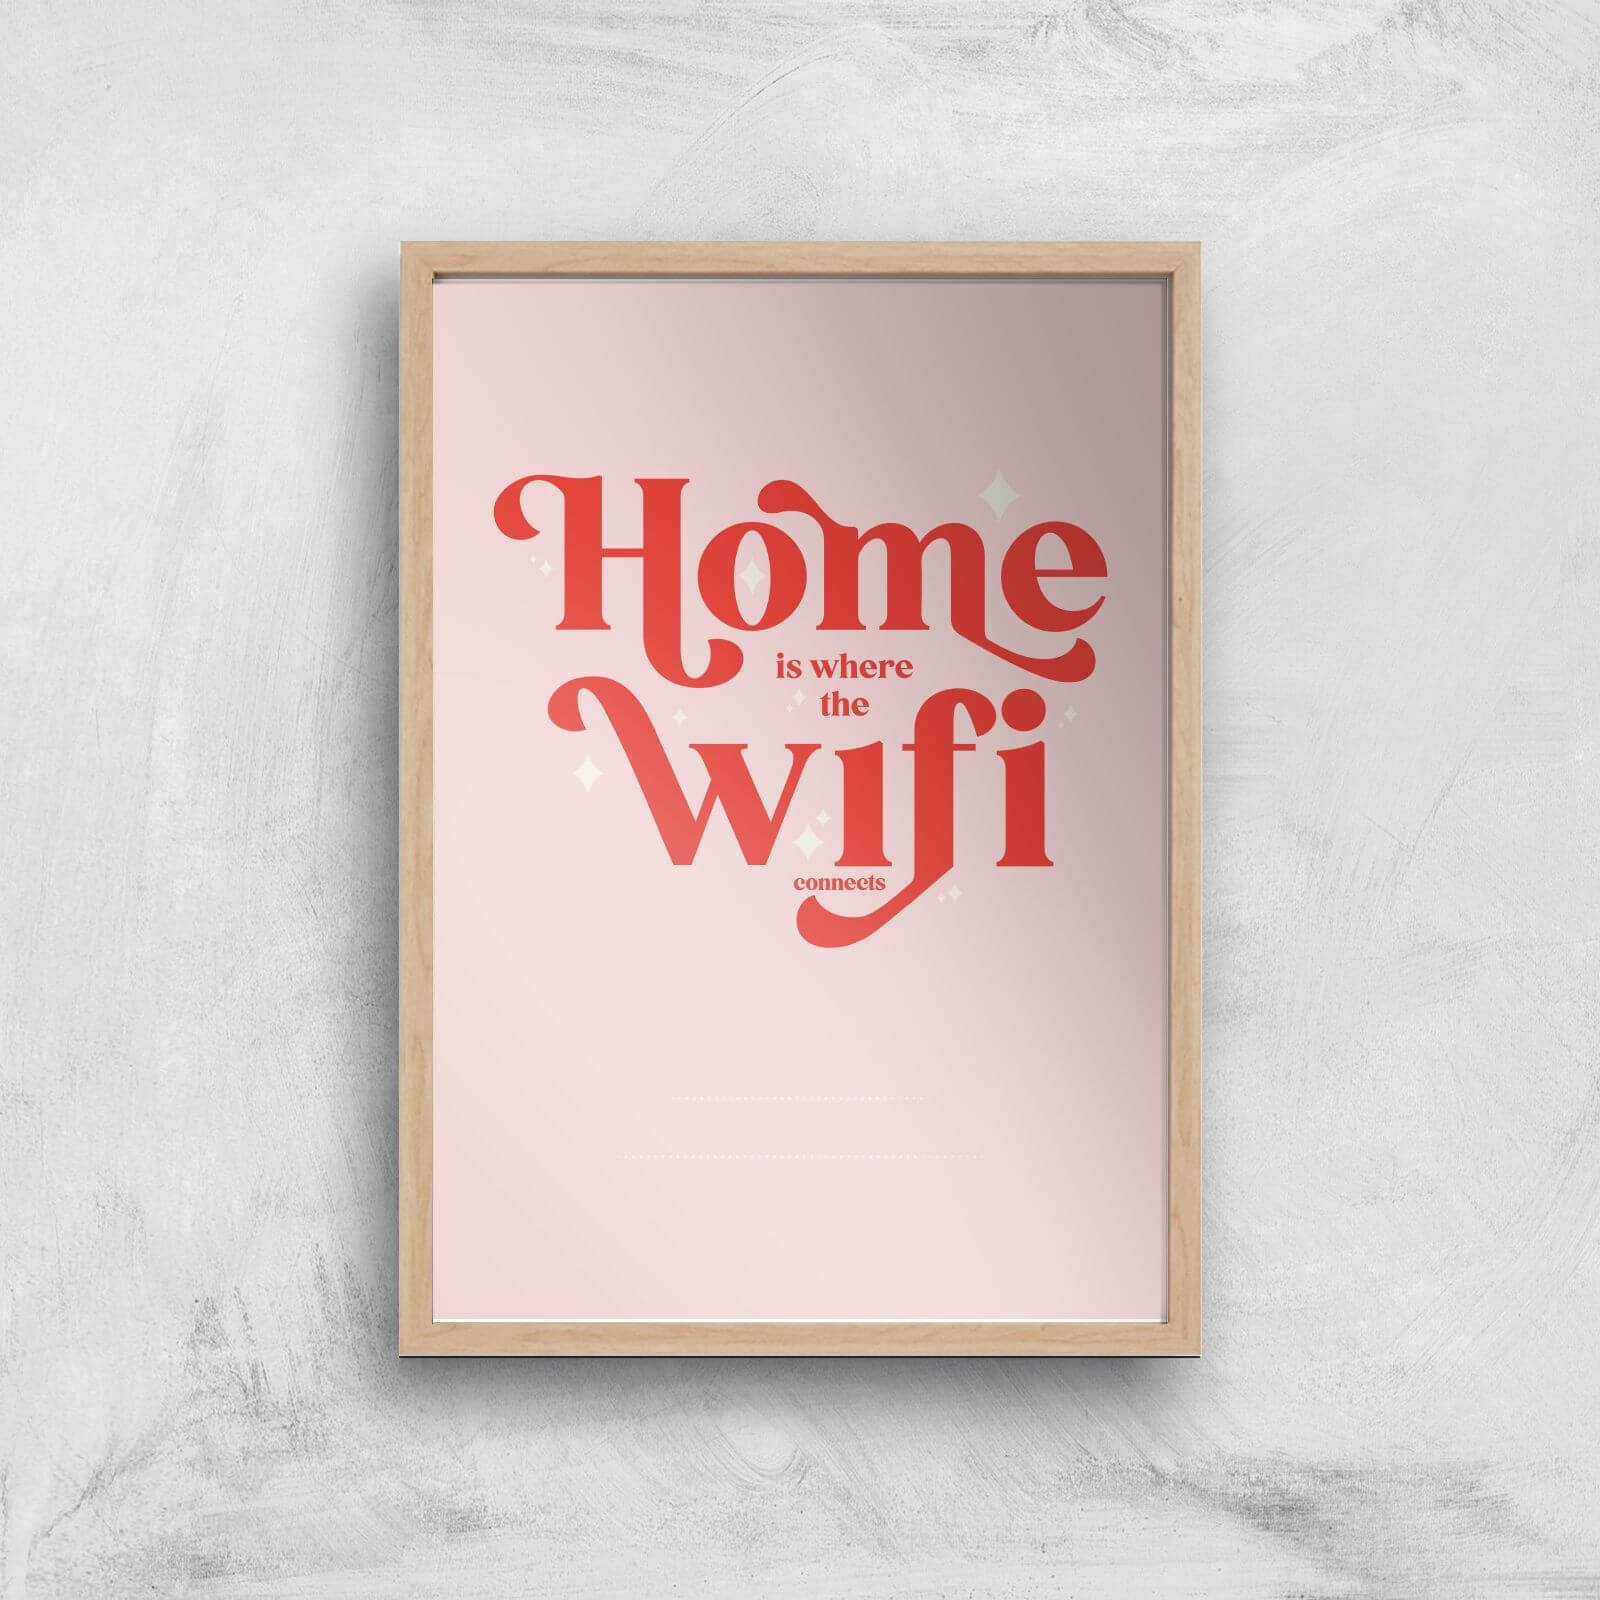 Hermione Chantal Light Home Is Where The Wifi Is Giclee Art Print - A2 - Wooden Frame